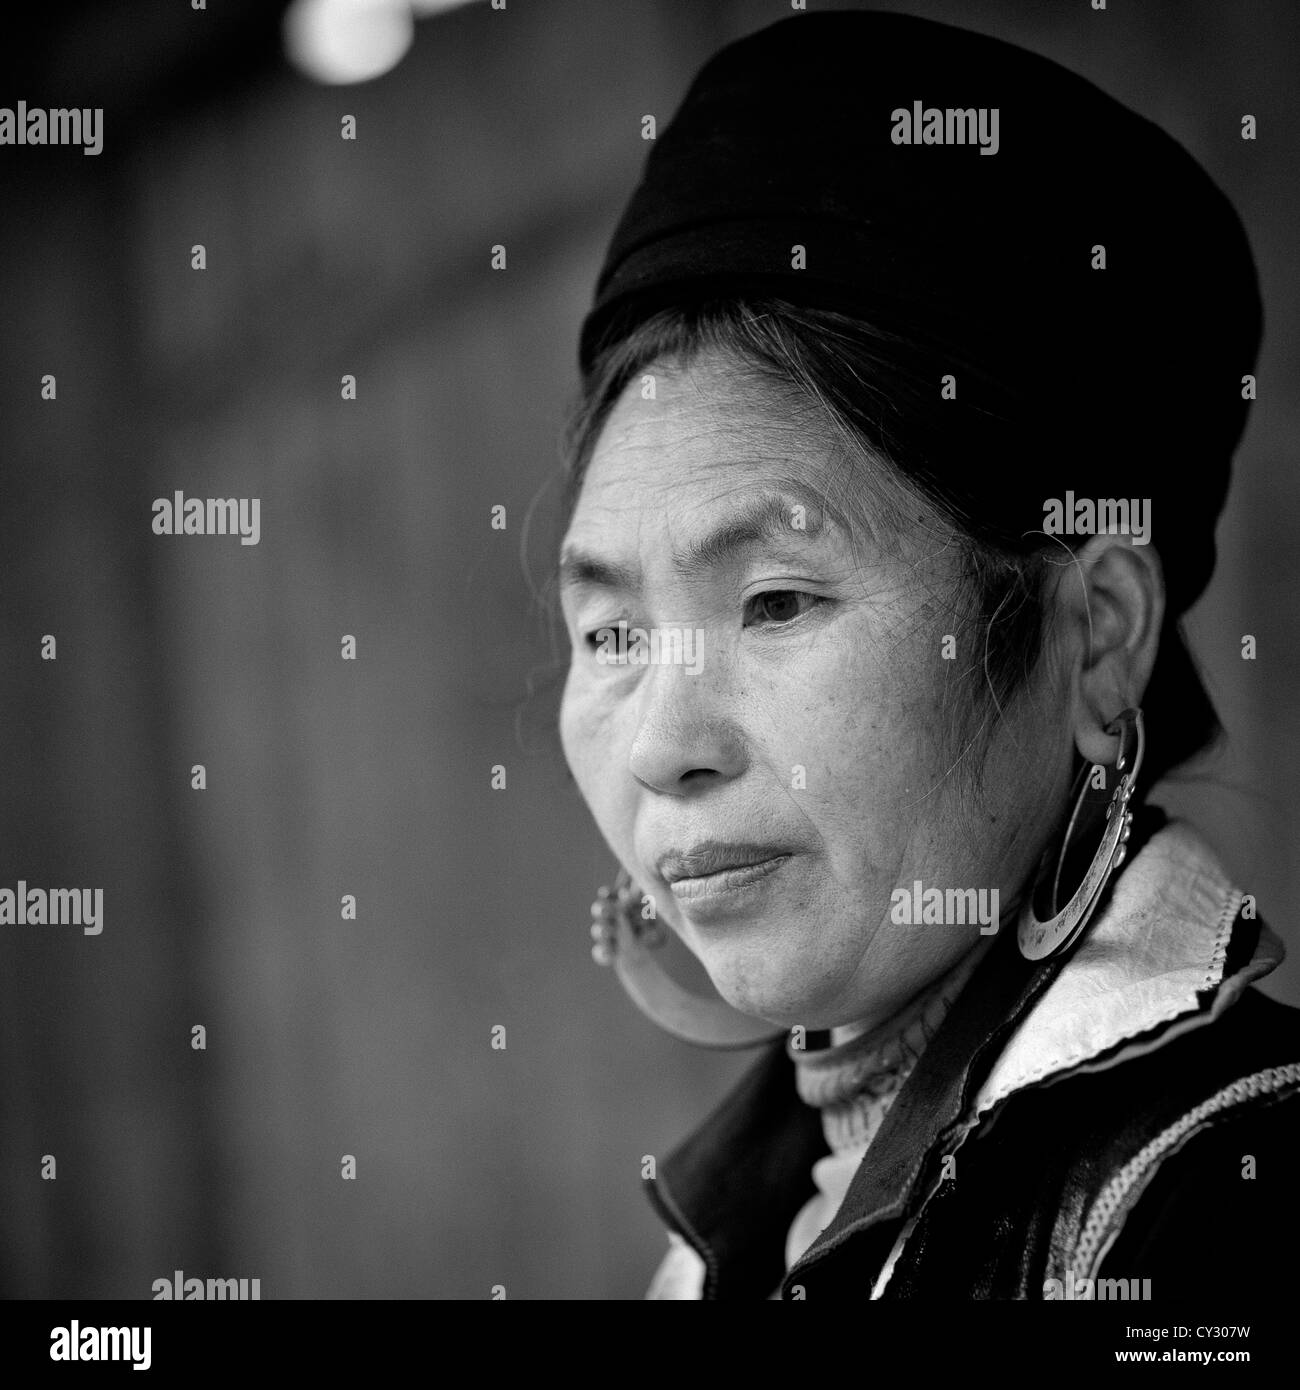 Black Hmong Woman With Traditional Headgear And Earrings, Sapa, Vietnam Stock Photo